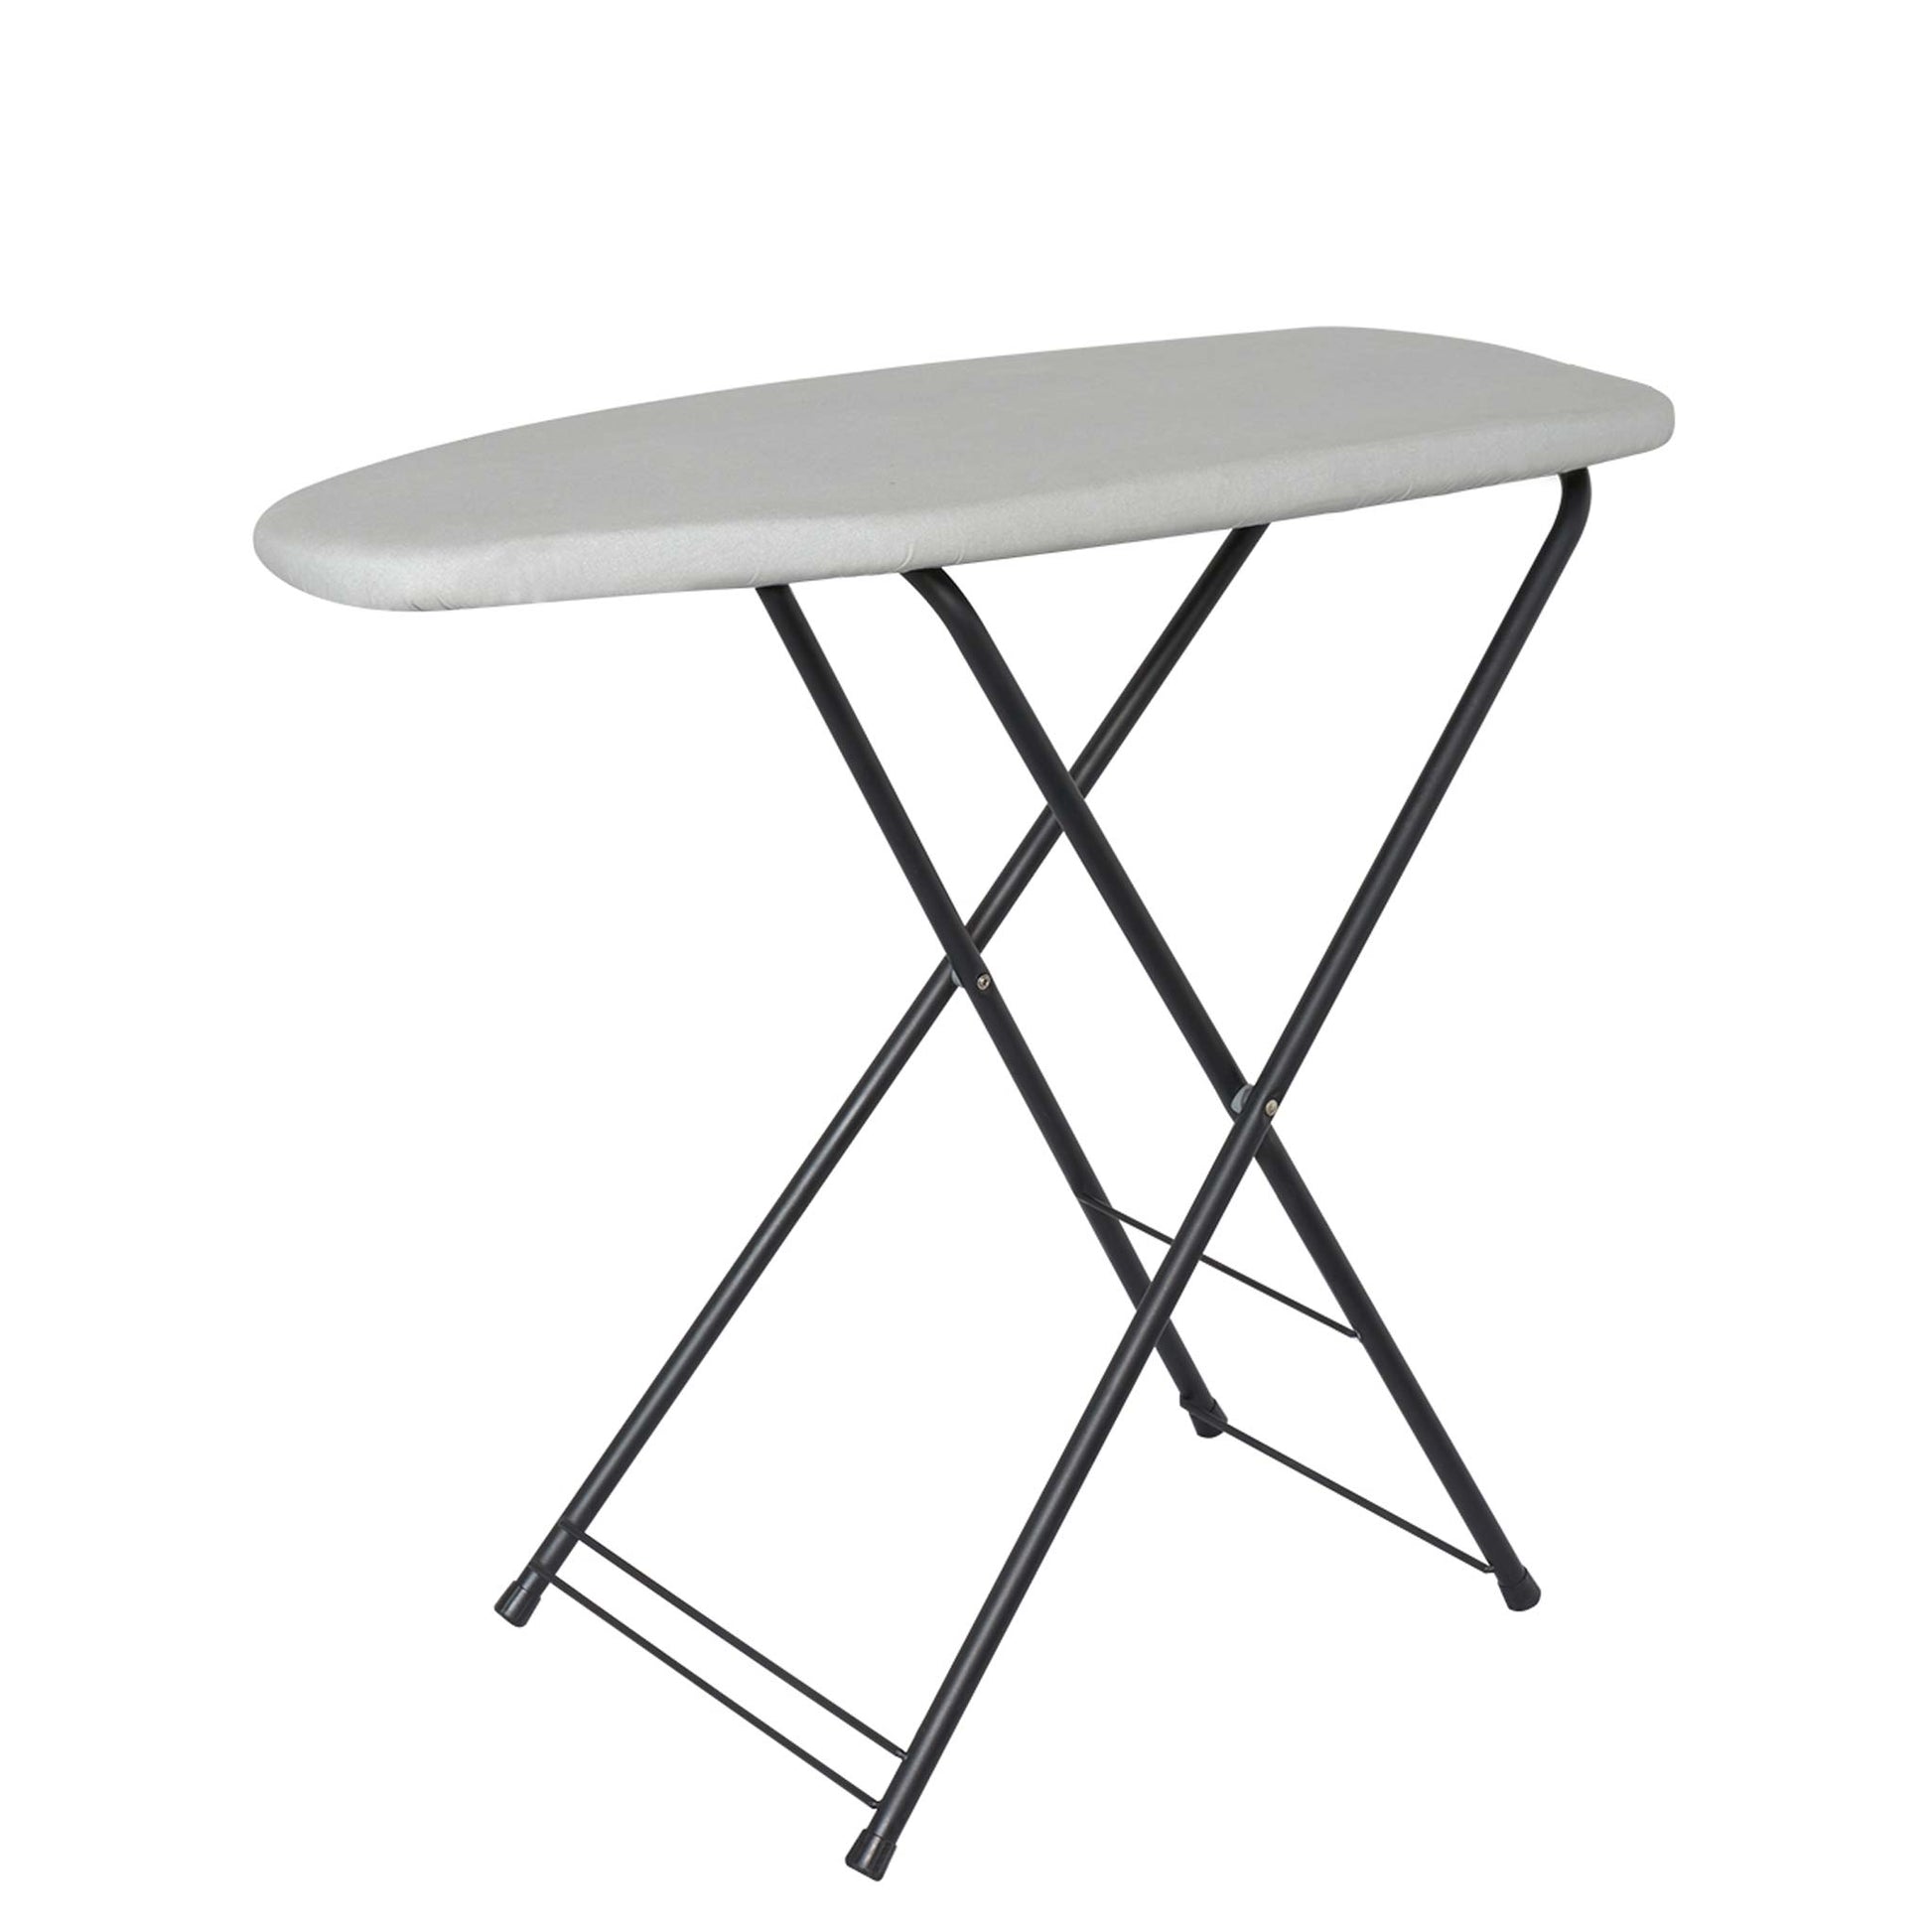 Corby Berkshire compact ironing board in light grey standing